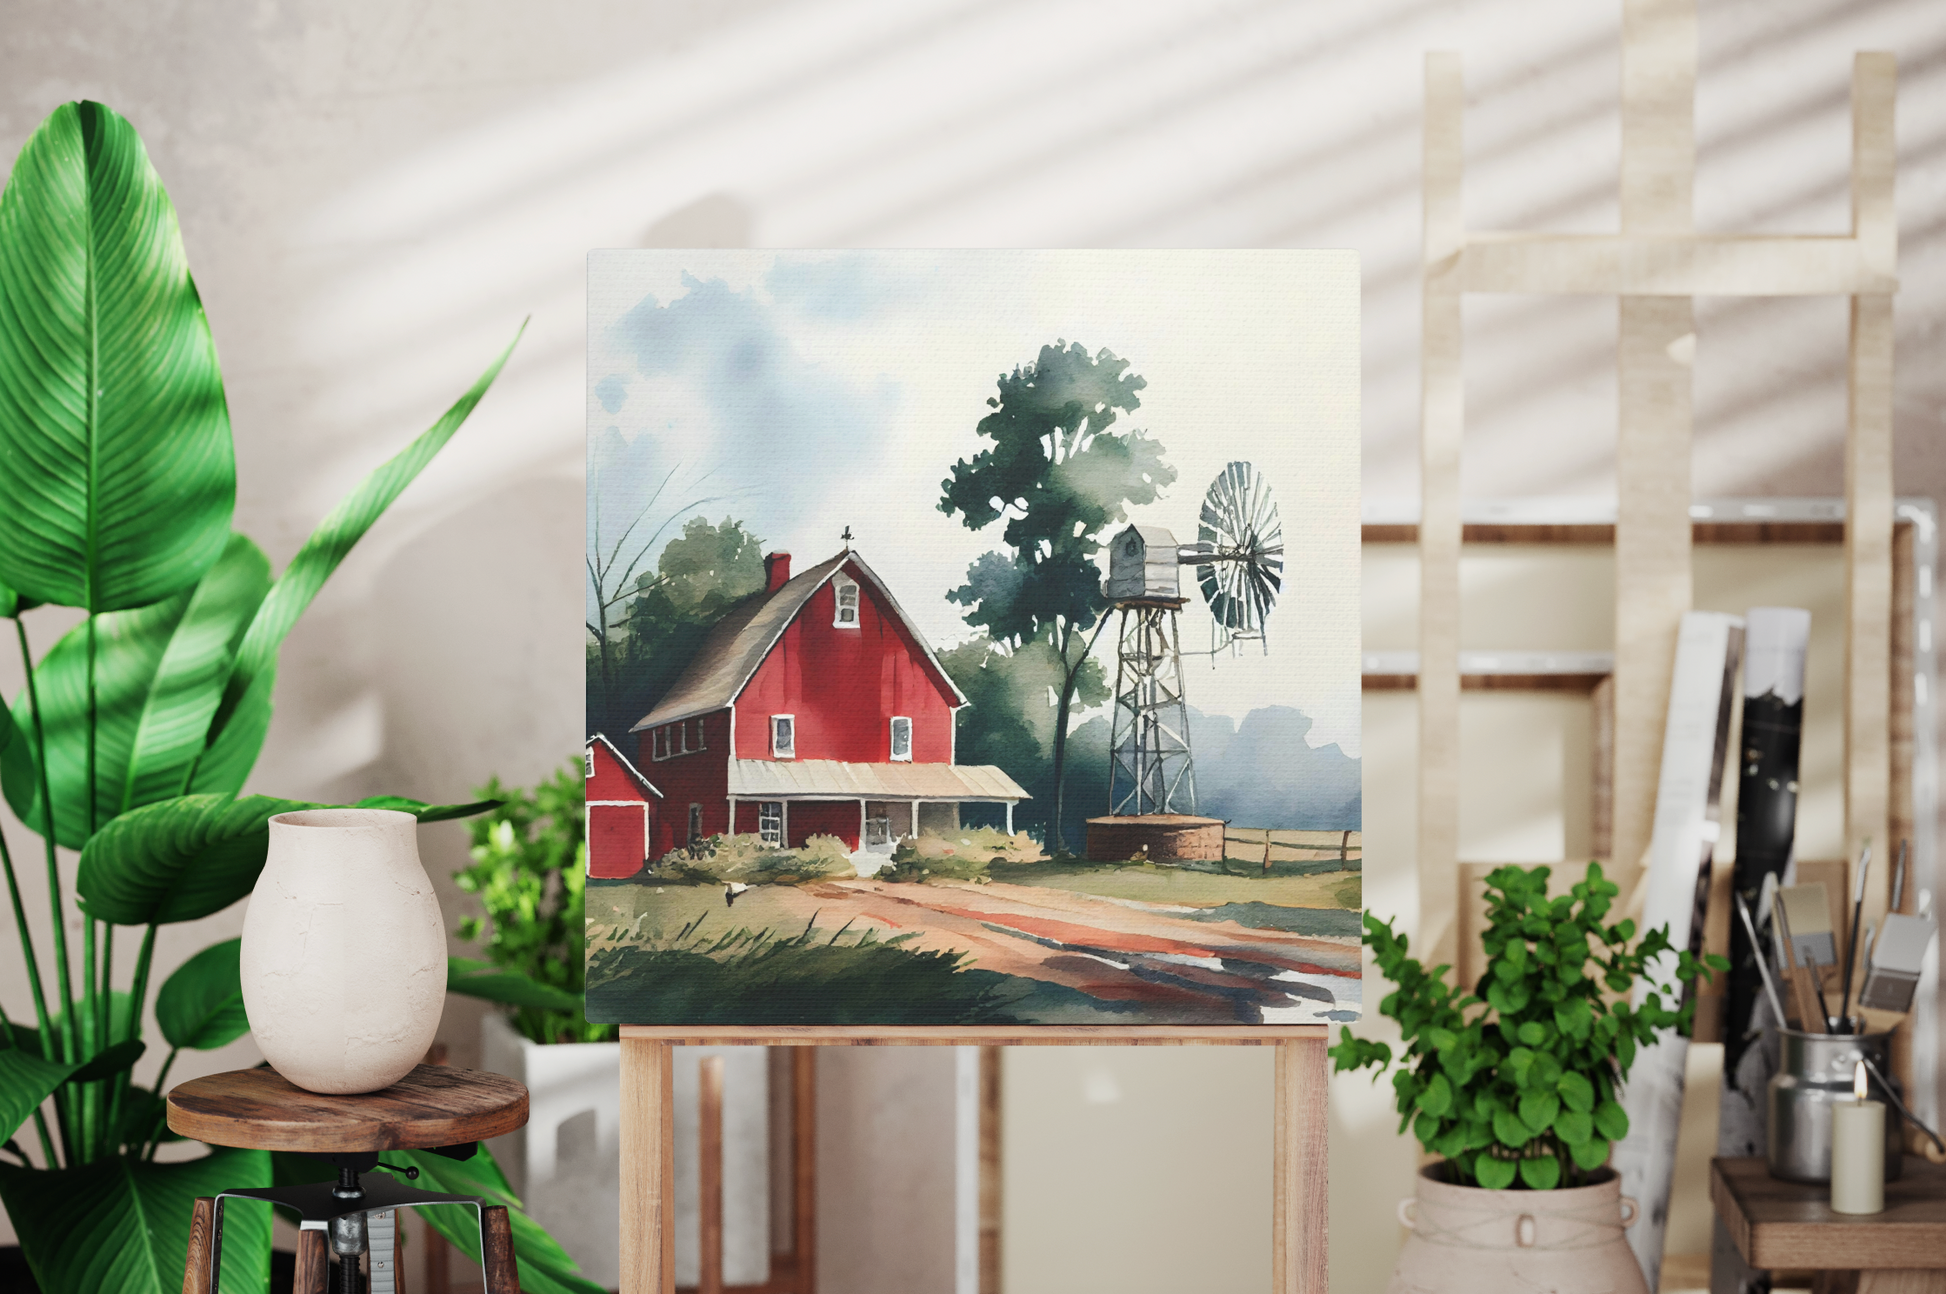 watercolor barn canvas artwork on a wall, red barn canvas art print on a living room wall, barn with a windmill canvas farmhouse theme displayed in your farm home decor wall